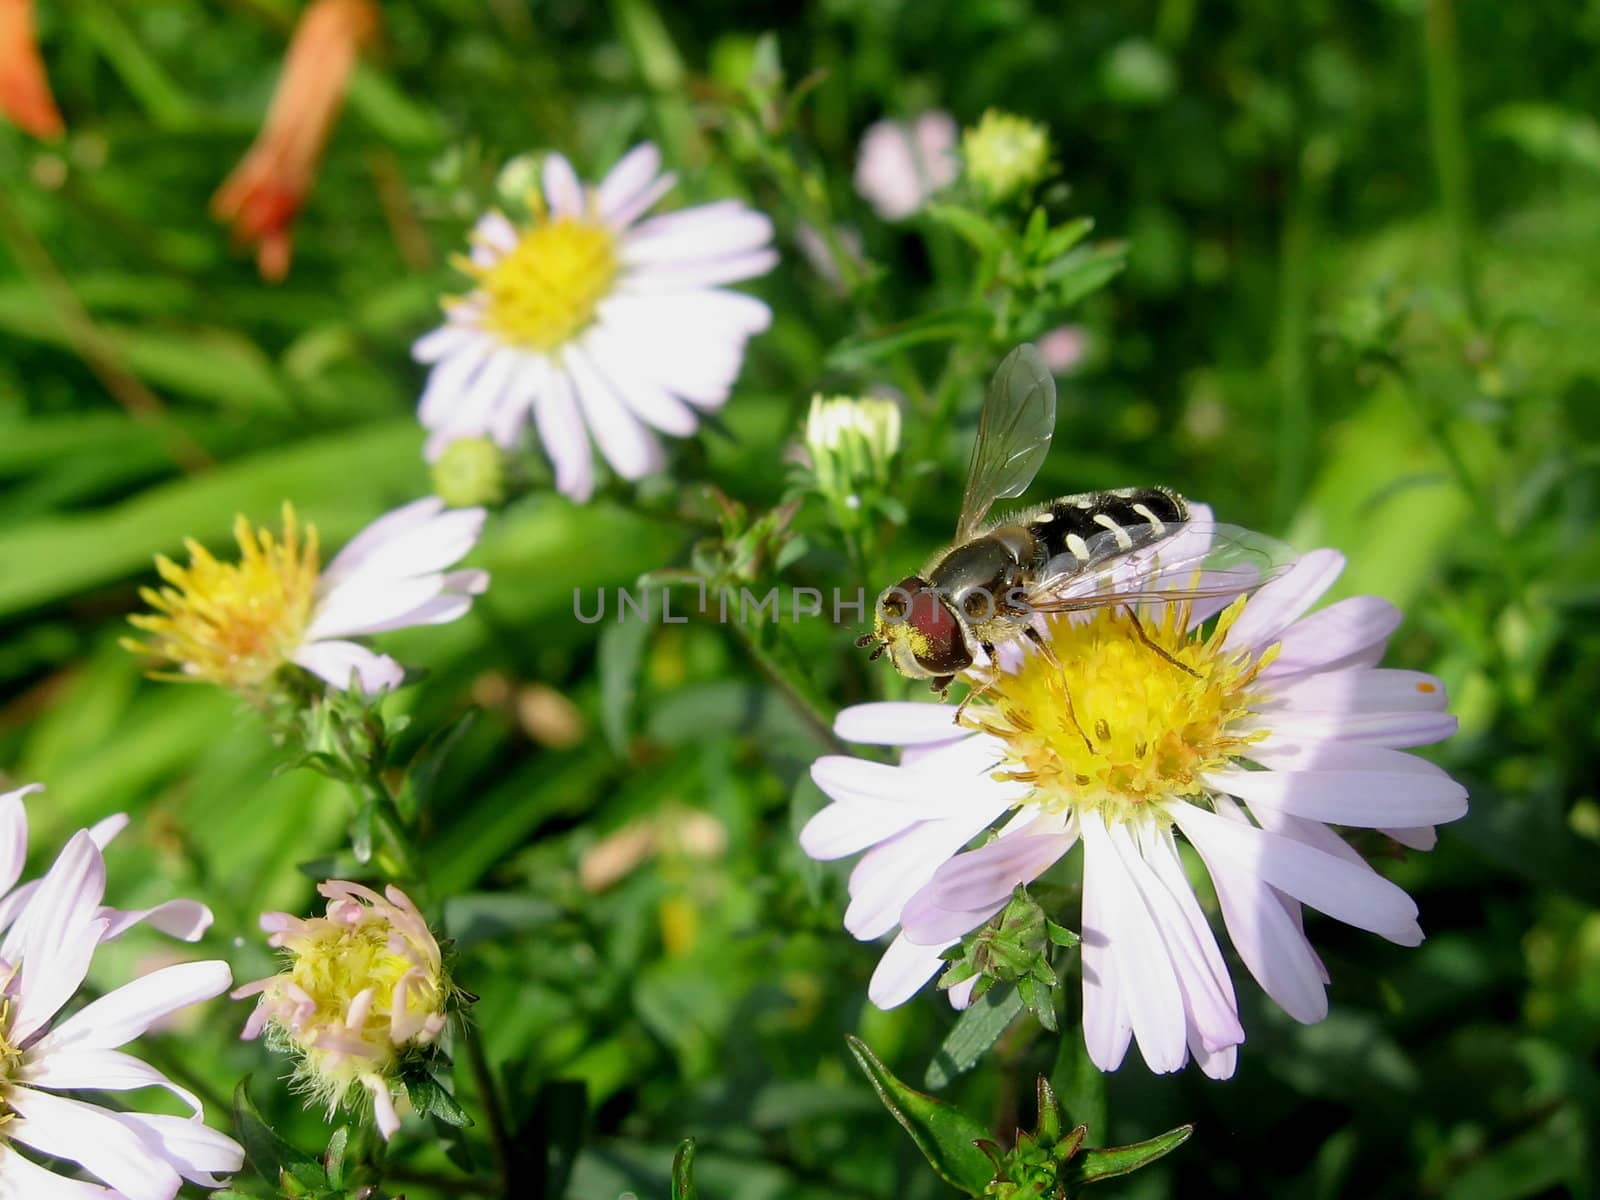 Motley fly sits on the chamomile flower